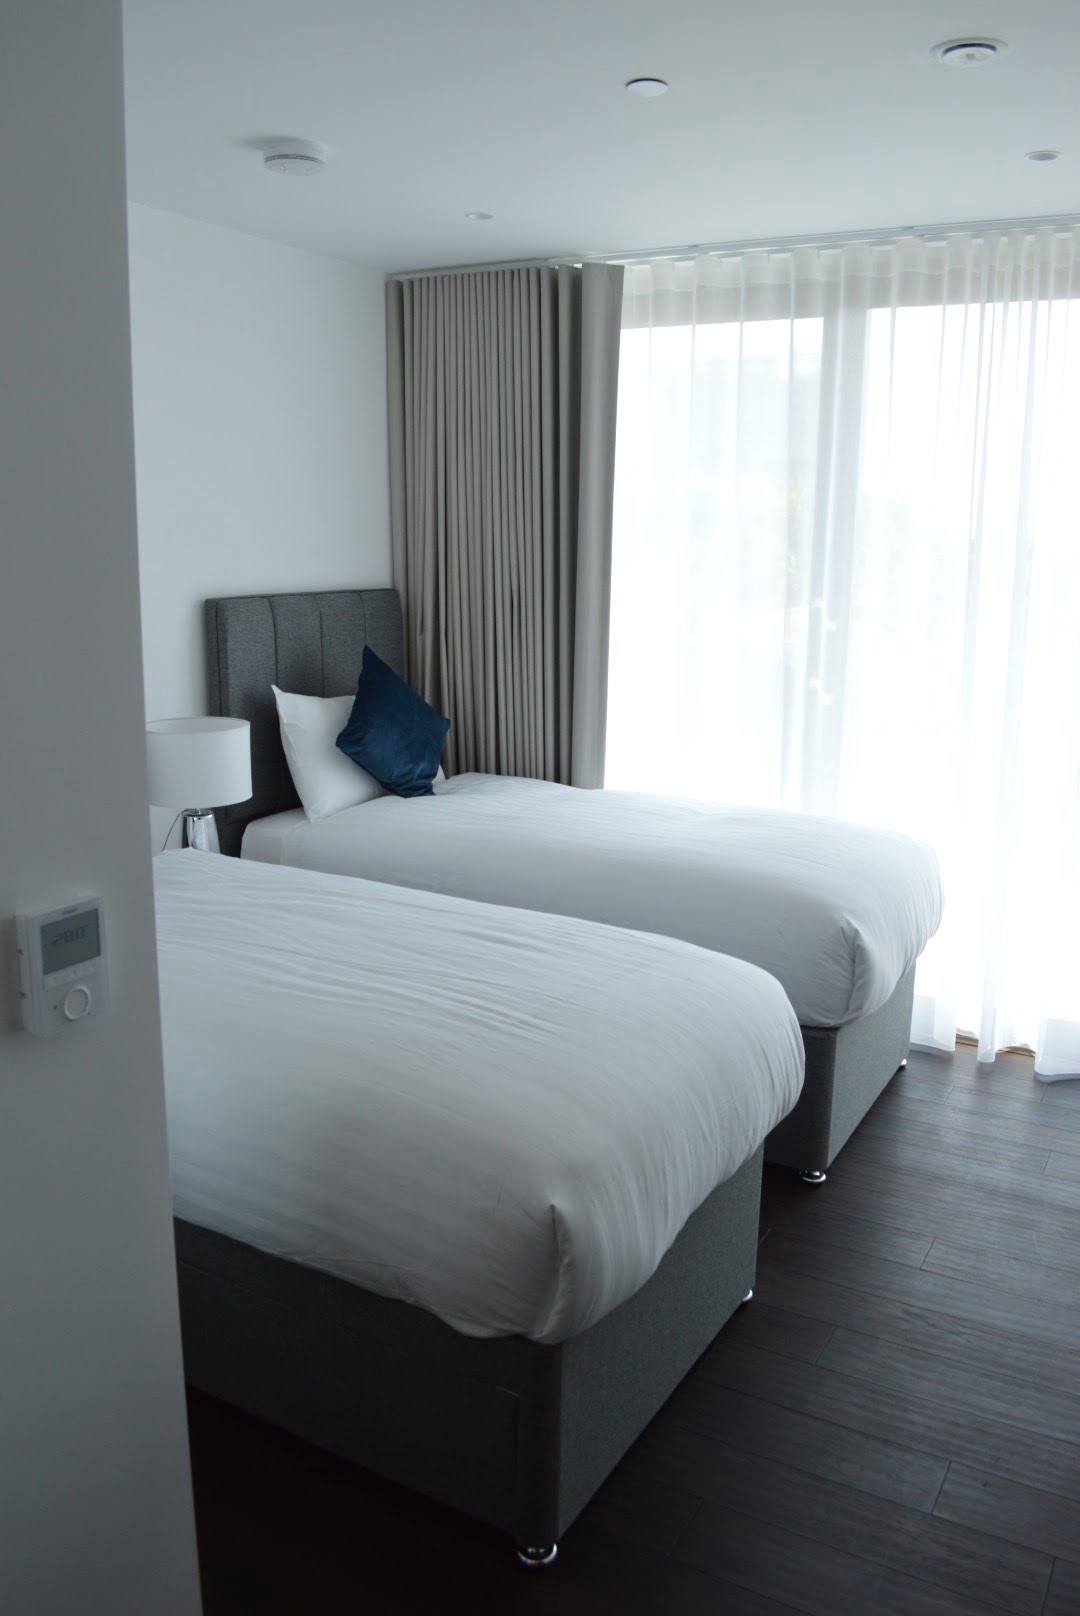 A modern, minimalist hotel room with two single beds, white bedding, a grey headboard, and sheer curtains in front of a window. Dark wood flooring contrasts the light walls.